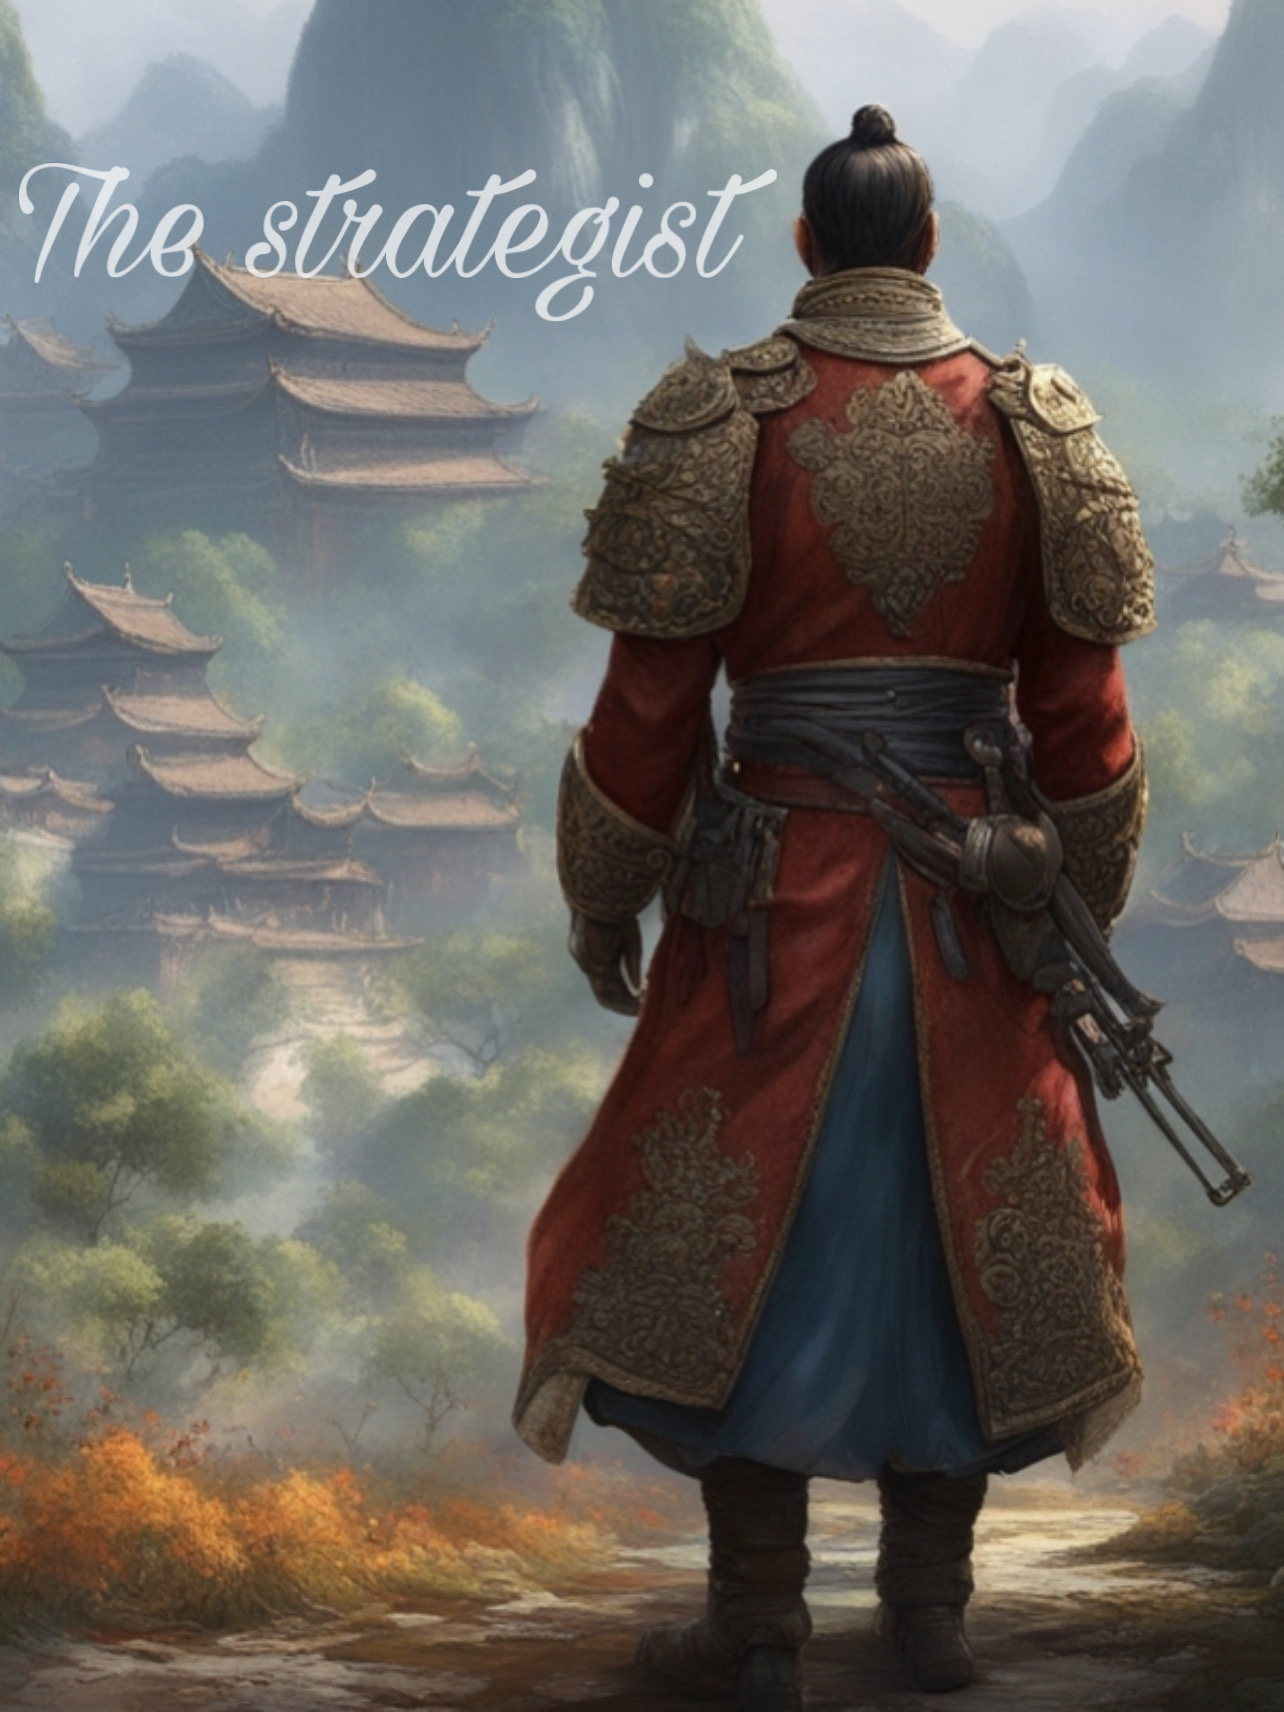 The first strategist